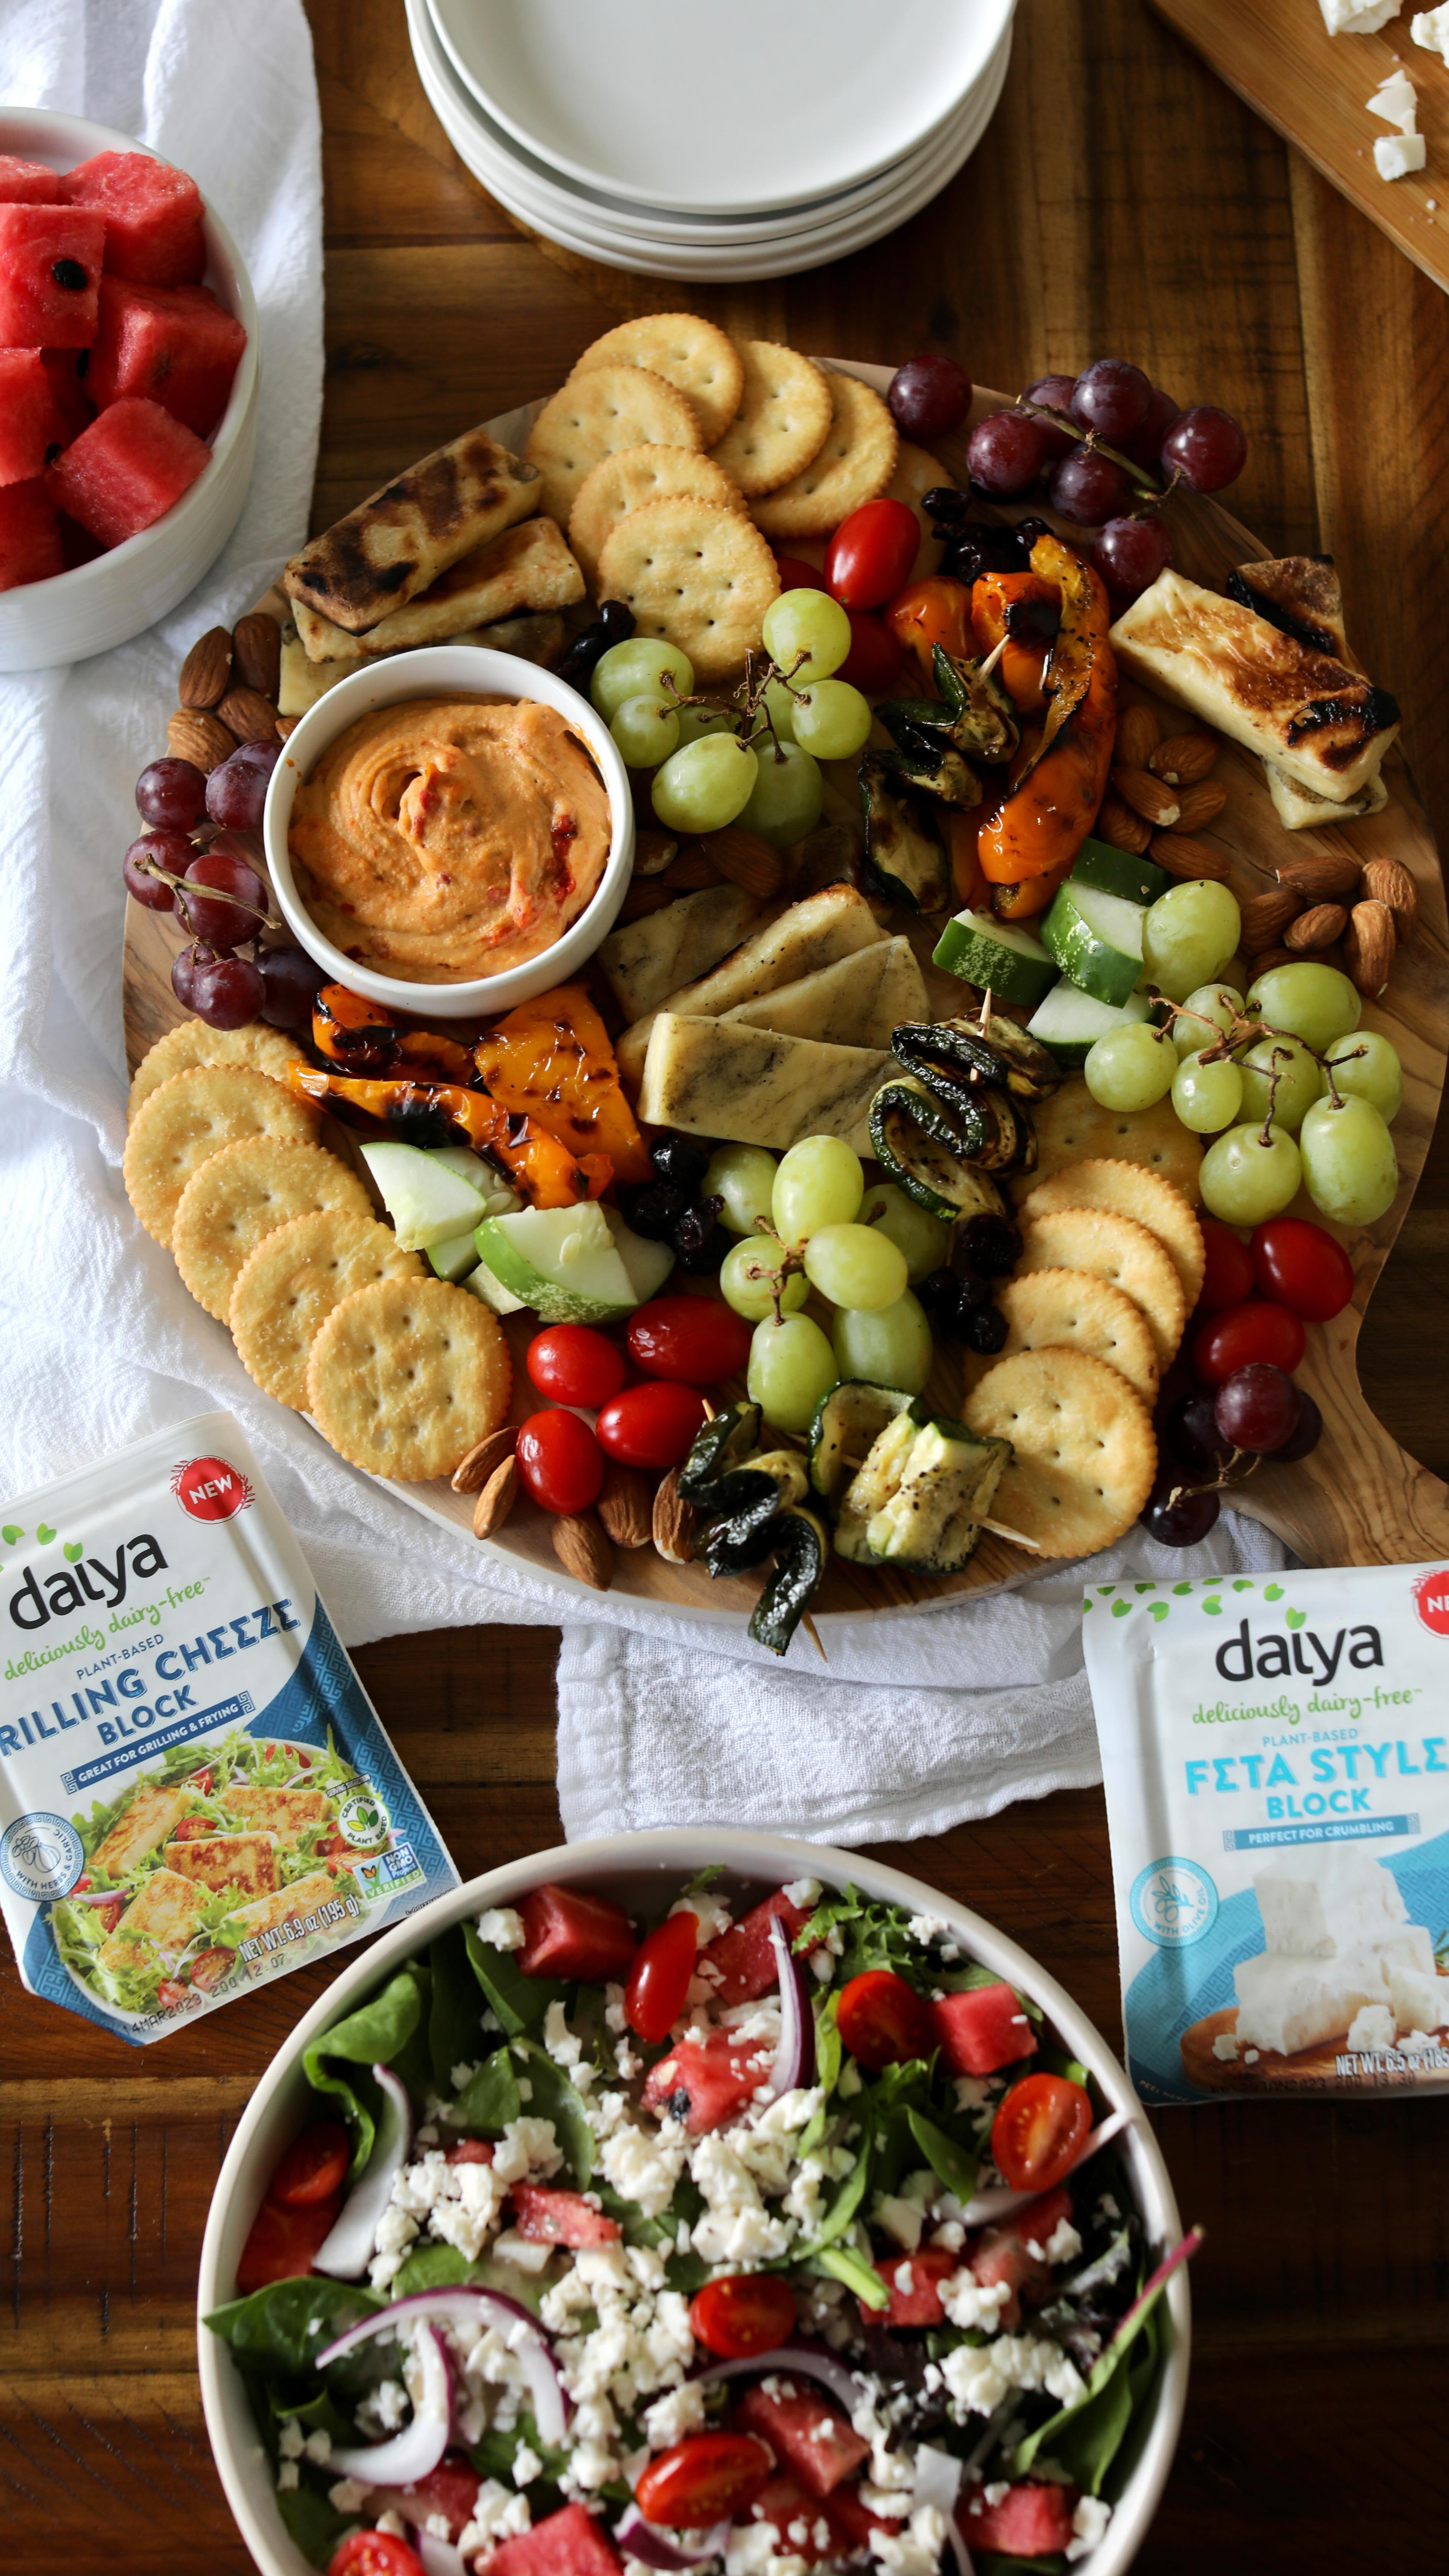 *CLOSED* Grilling season 🔥GIVEAWAY🔥, but  make it  e l e v a t e d.😏 [ad]

I've been enjoying plant-based charcuterie boards and non-boring salads every chance I get so I was super excited to partner with @daiyafoods and use their new Grilling Cheeze and Feta Style Block to whip up something special!

I love that their new #vegan cheese offerings are so easy to use and give me the taste I'm looking for whenever I'm in the mood for something cheesy! Got me over here feelin' so fancy!💁🏾‍♀️ 

I want you to be able to experience all this cheesy goodness too and to be able to BYOB (Bring Your Own Block!) to your next cookout so we're doing a GIVEAWAYYYY! 🥳🥳

THREE lucky winners will have the chance to win the ULTIMATE Plant-Based Summer Grill Pack! Enter to win a summertime supply of Daiya Cheeze + a Traeger Grill! 

How to enter:
🧀 Must be following @daiyafoods AND @icanyoucanvegan
🧀 Tag 2 friends in the comments below
🧀 Share this post to your stories for a BONUS entry!

The winners will be announced in my stories on Monday, August 15 so be sure to enter NOWWWW! 🙌🏾